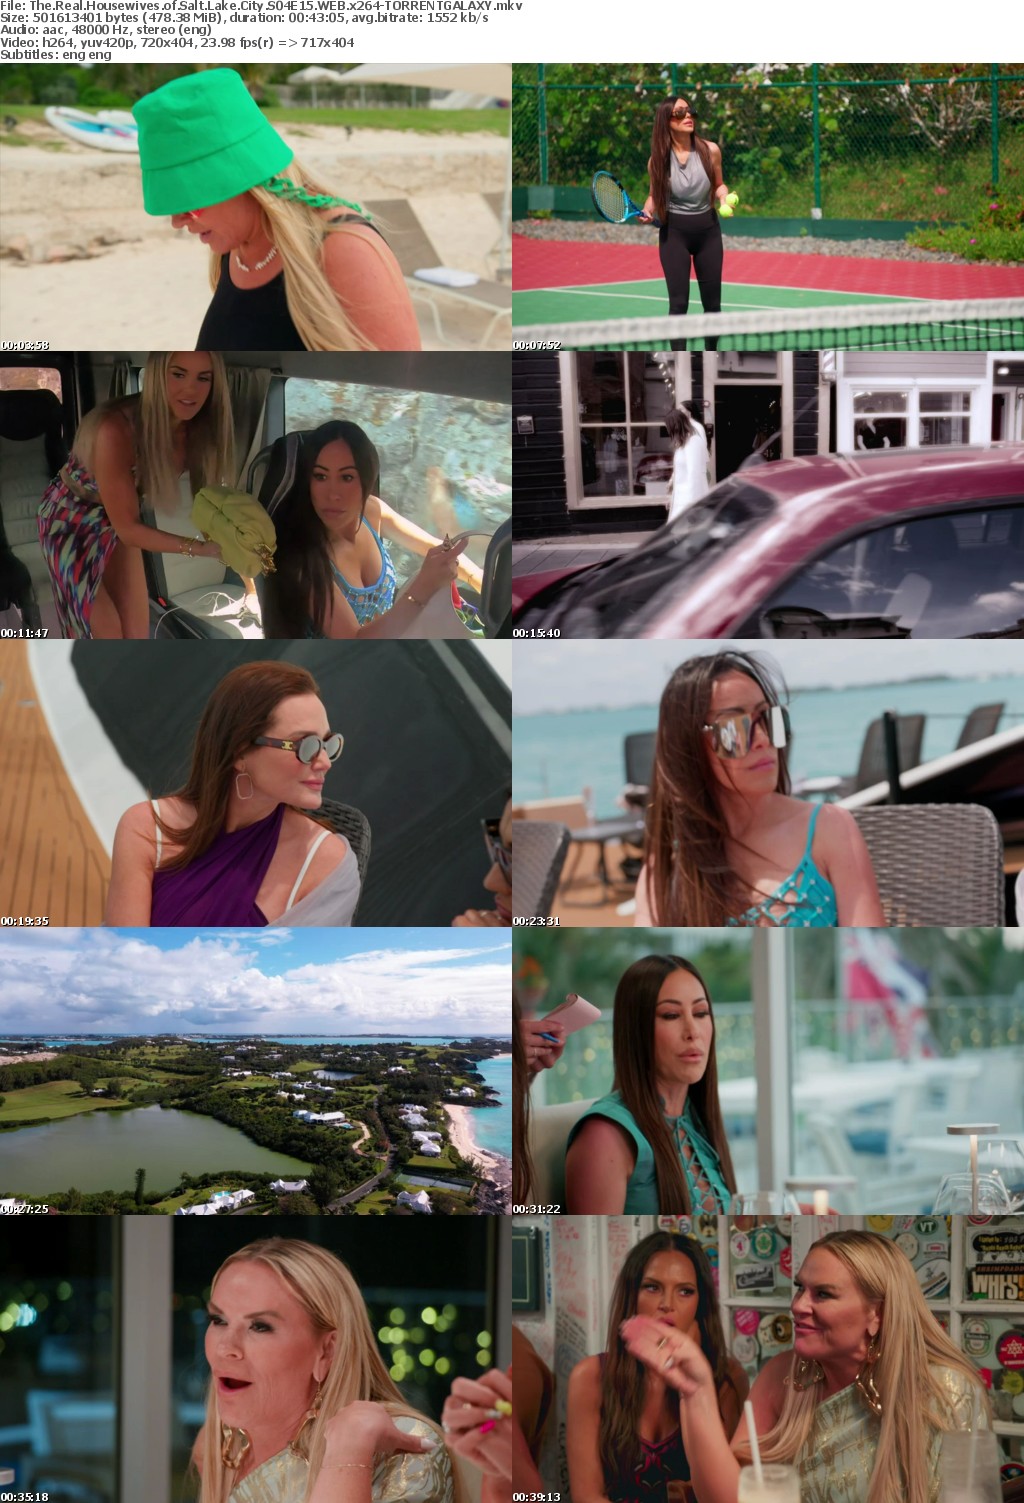 The Real Housewives of Salt Lake City S04E15 WEB x264-GALAXY